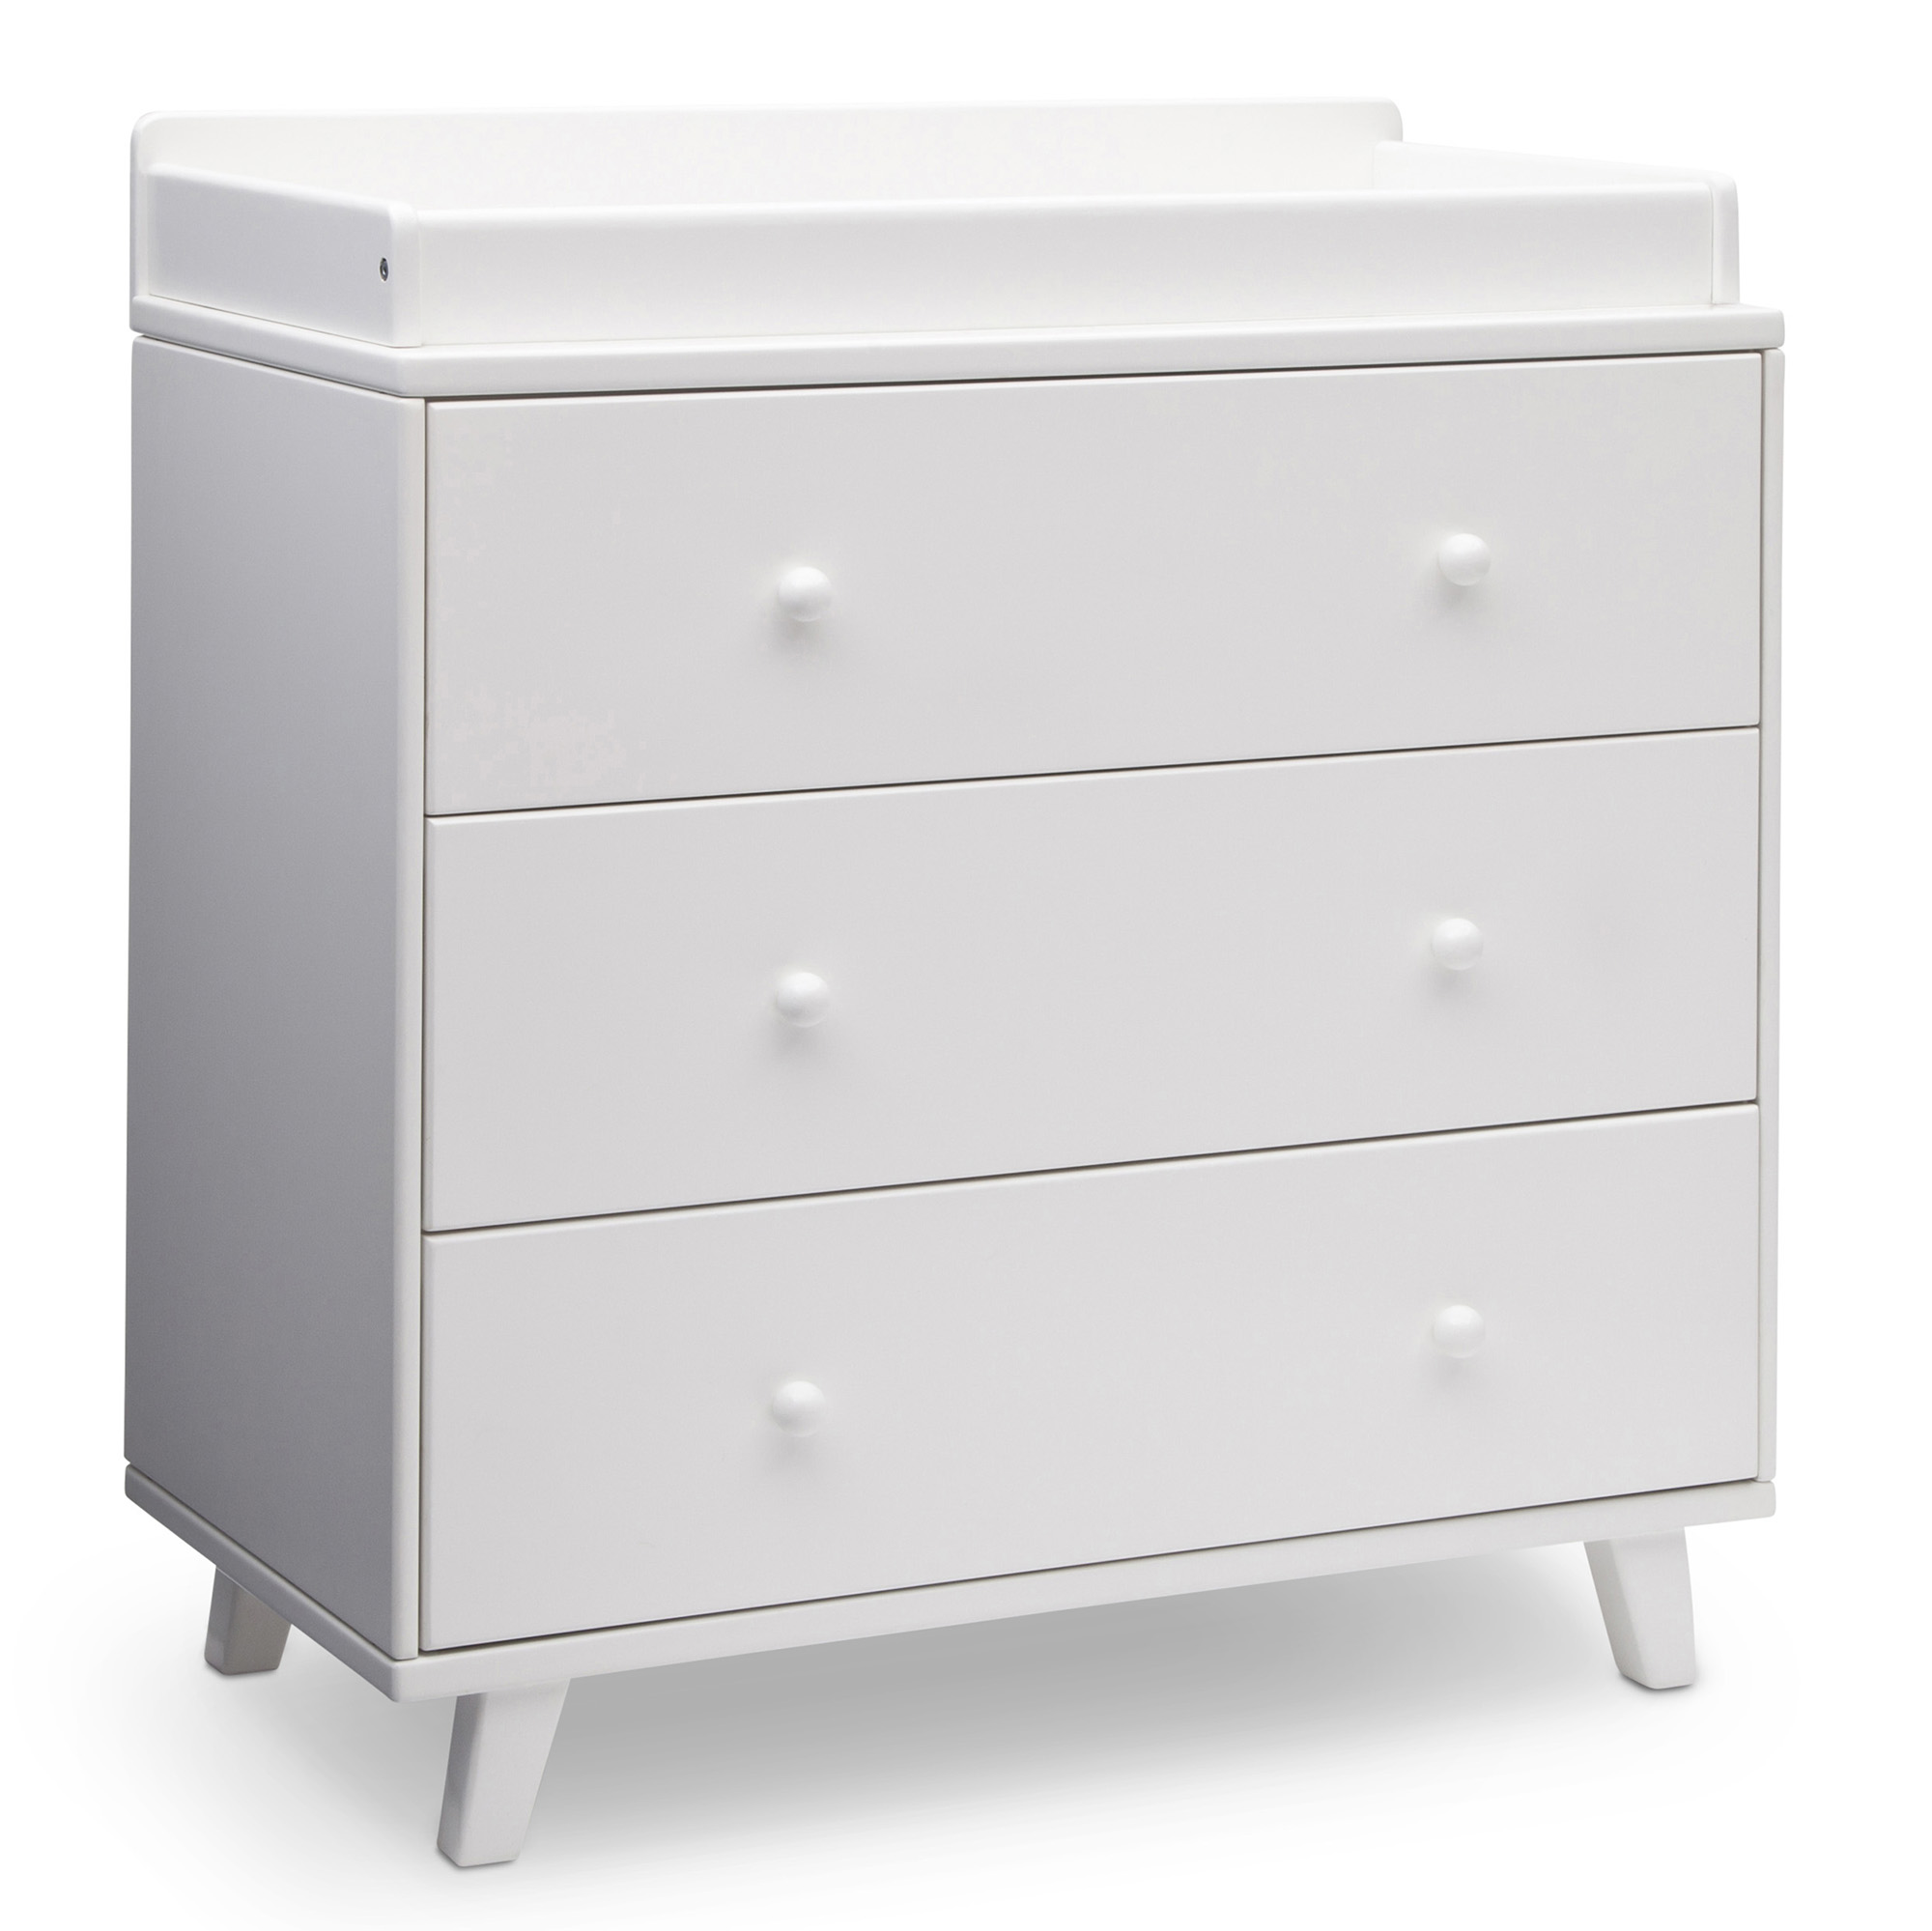 Delta Children Ava 3 Drawer Dresser with Changing Top, Greenguard Gold Certified, White - image 1 of 12